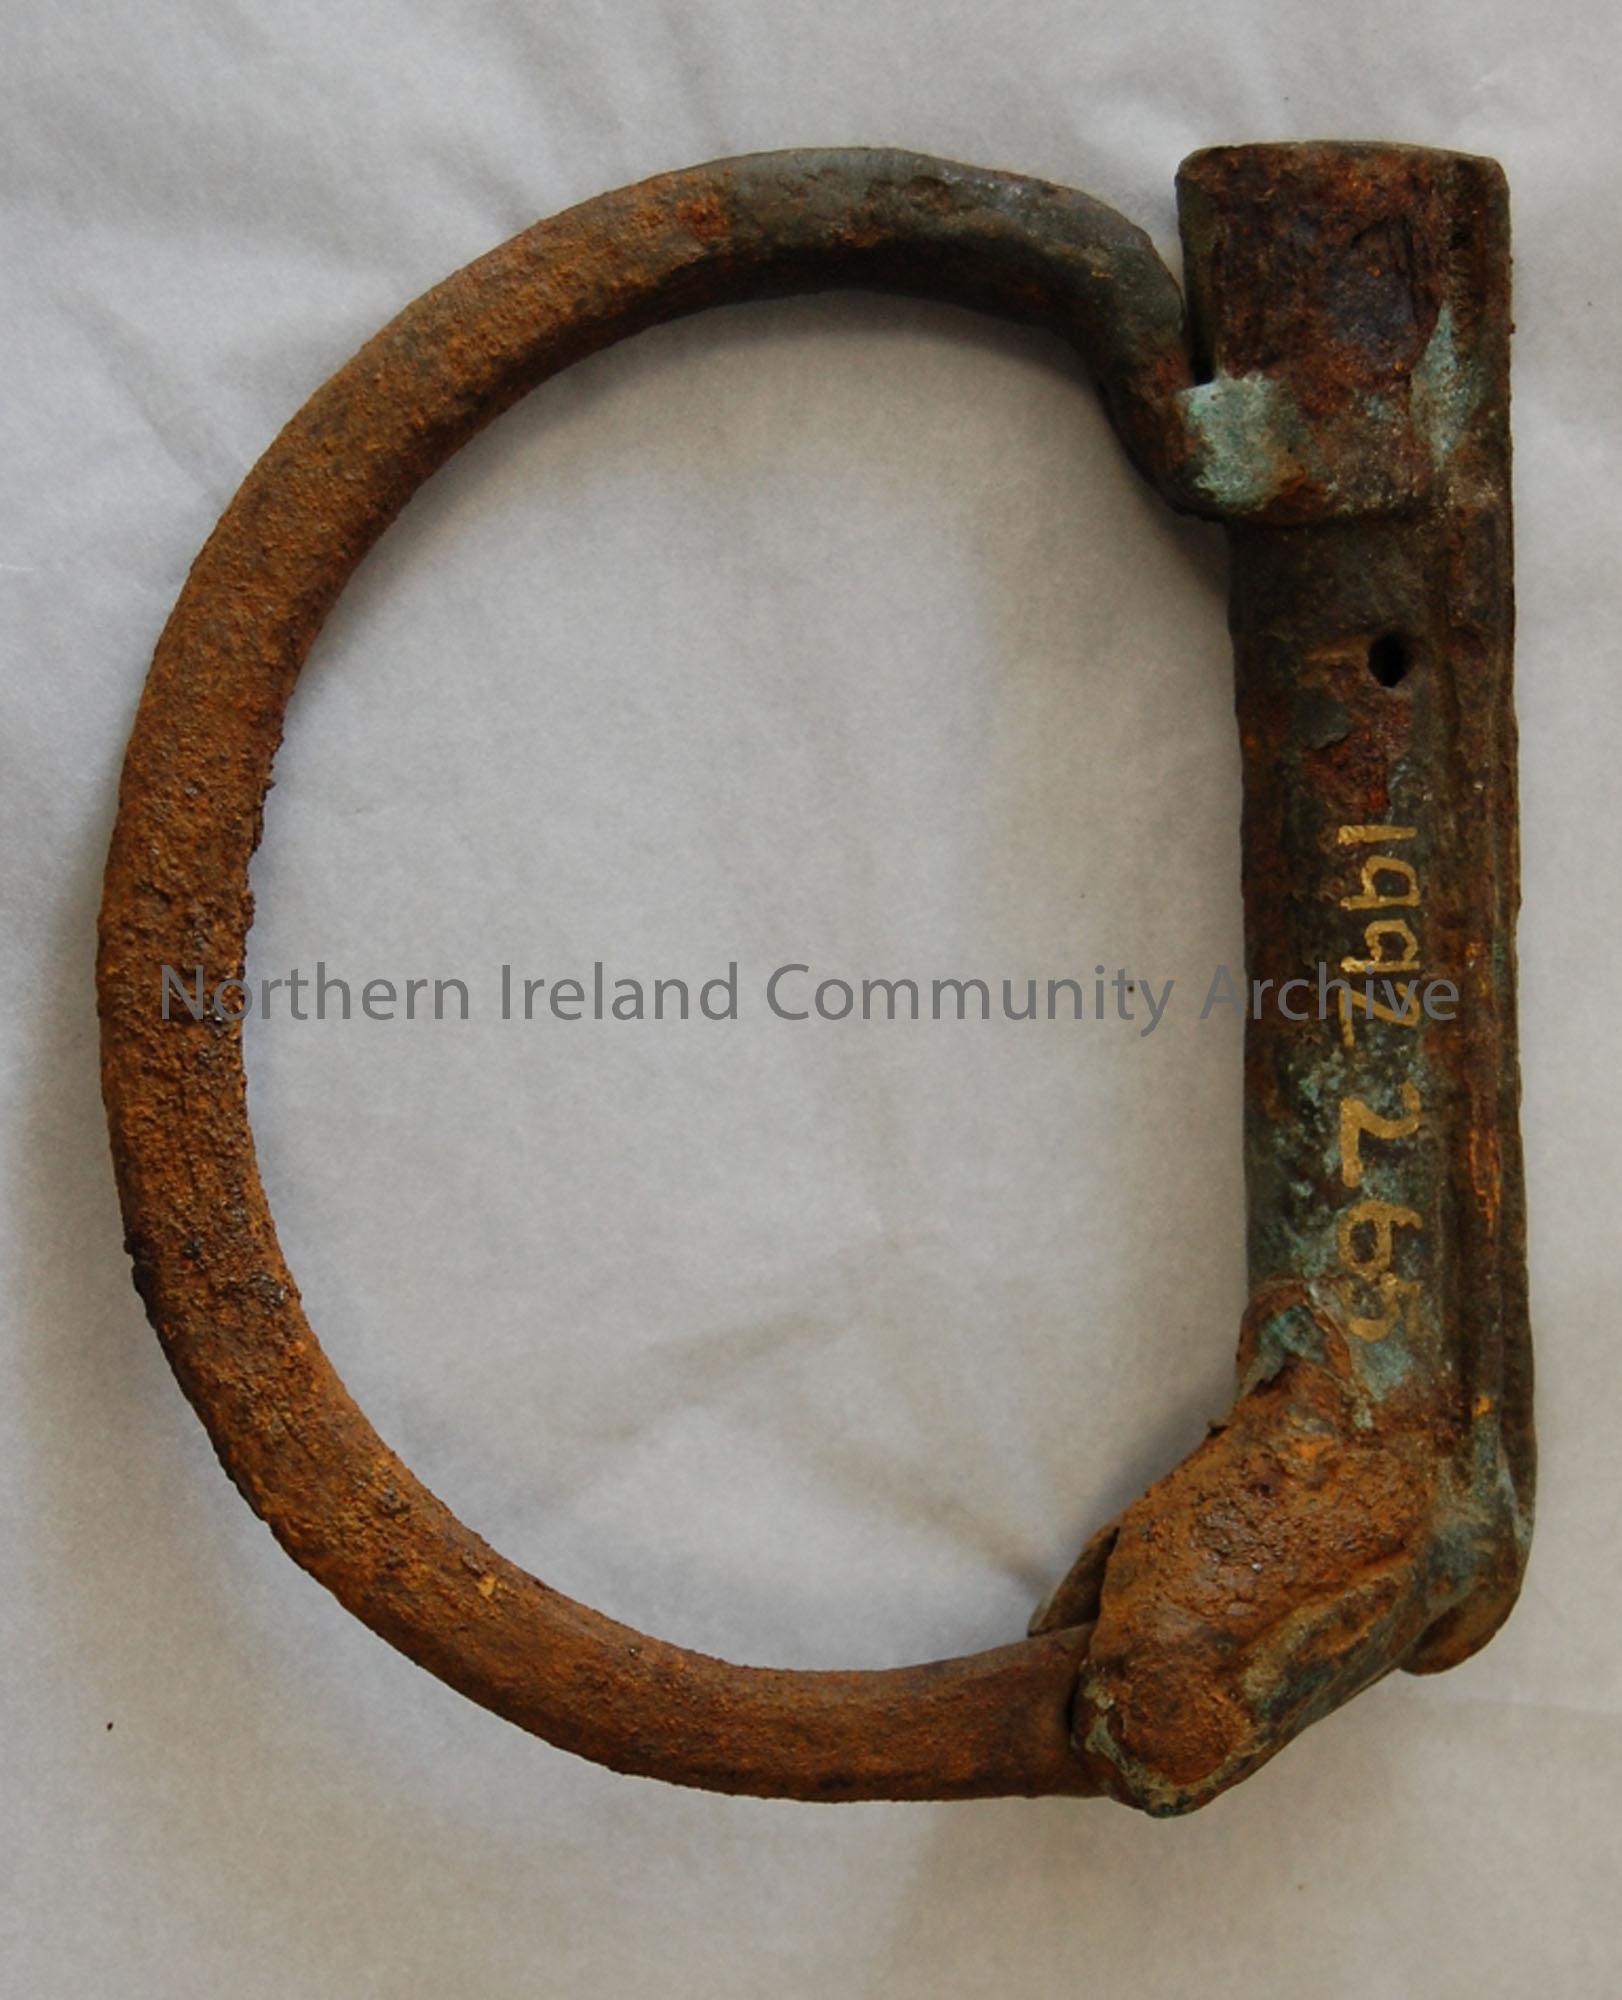 Object is shaped like a single ankle or hand cuff; the cuff is locked with a pin of wood; severe surface corrosion